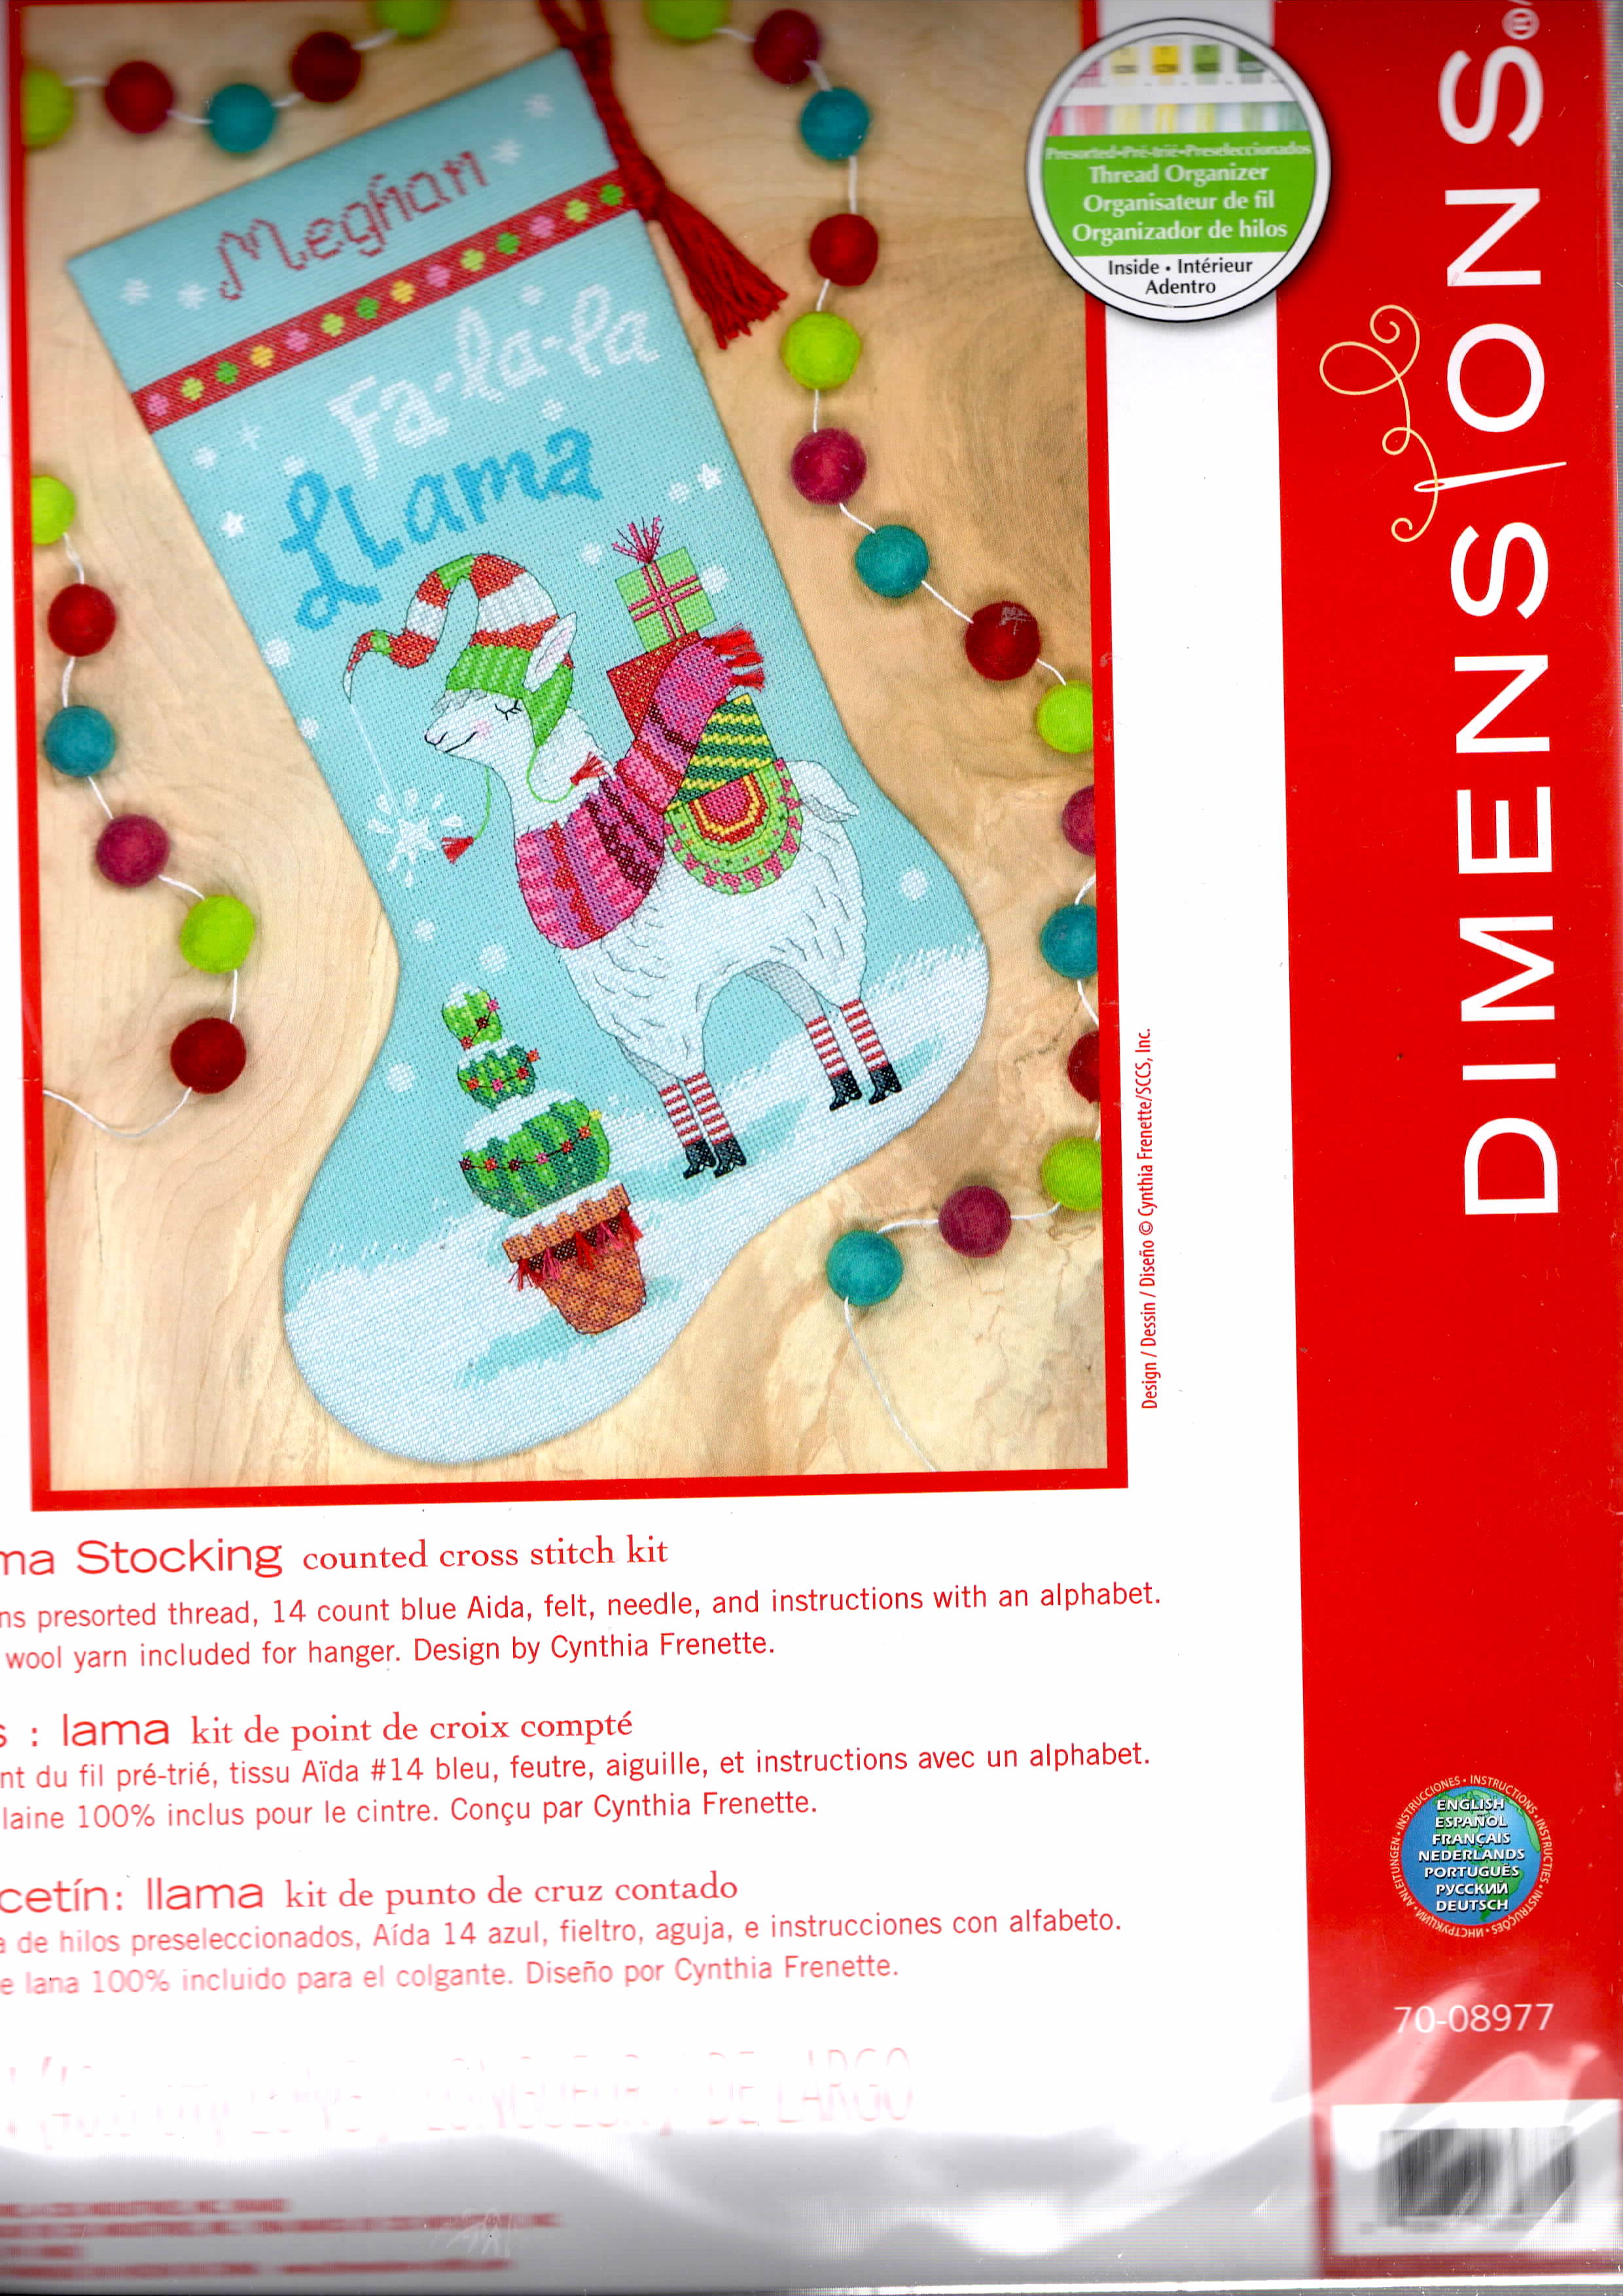 Dimensions counted cross stitch stocking kit. Design features a llama with gifts on his back and a cactus.